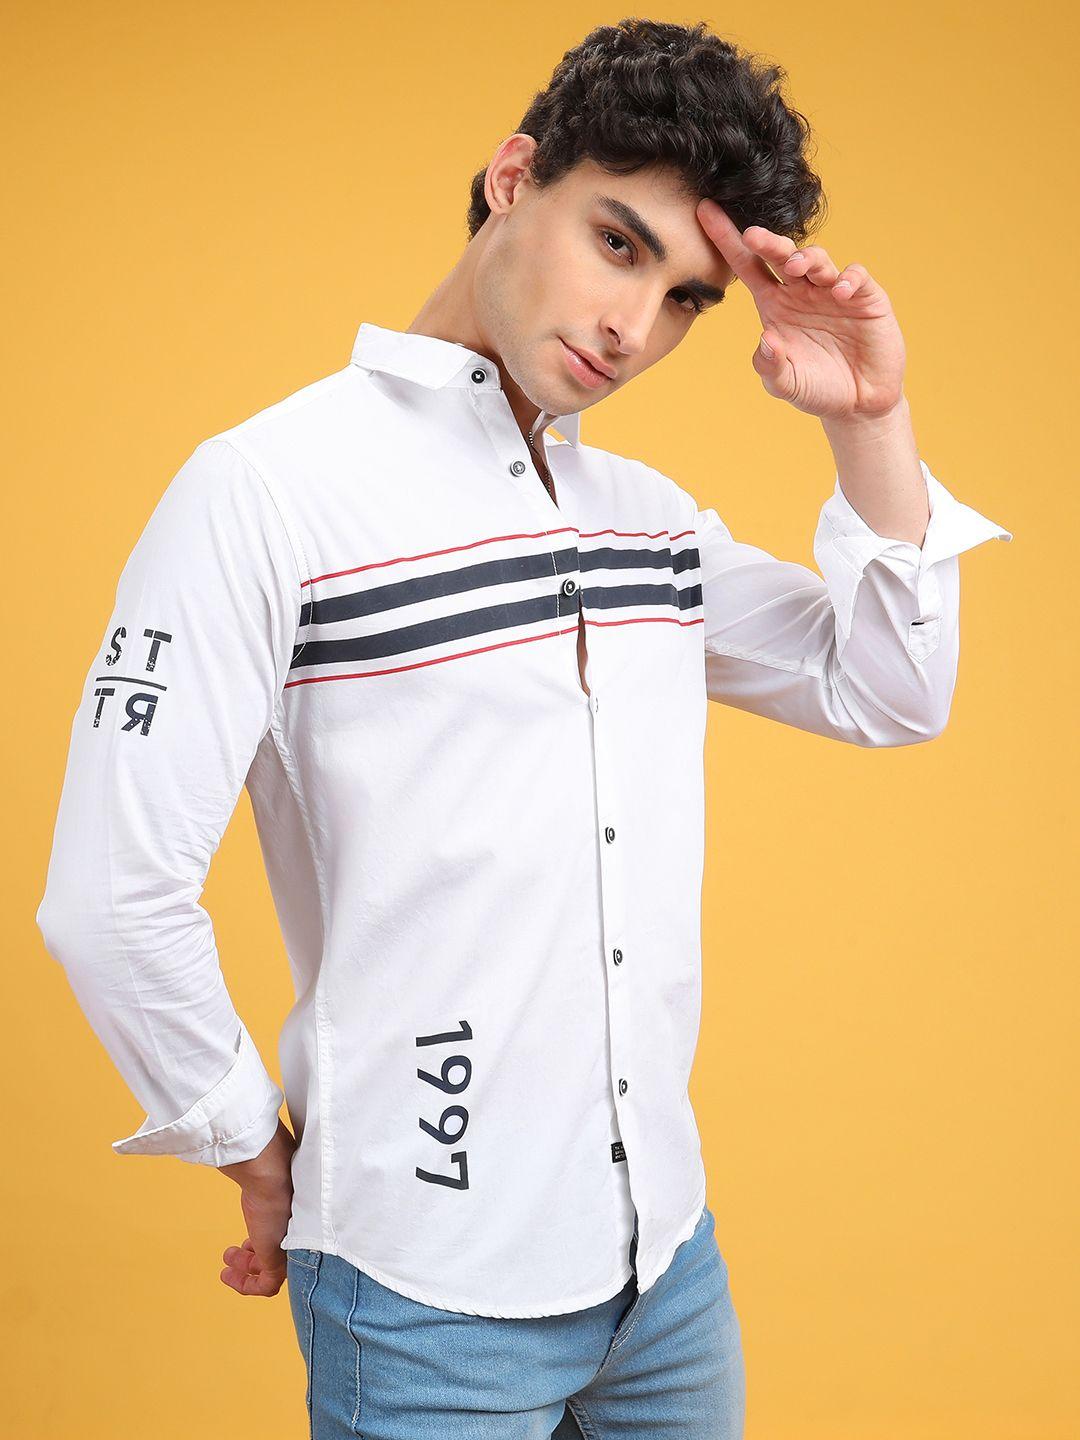 the-indian-garage-co-men-white-&-black-slim-fit-striped-casual-shirt